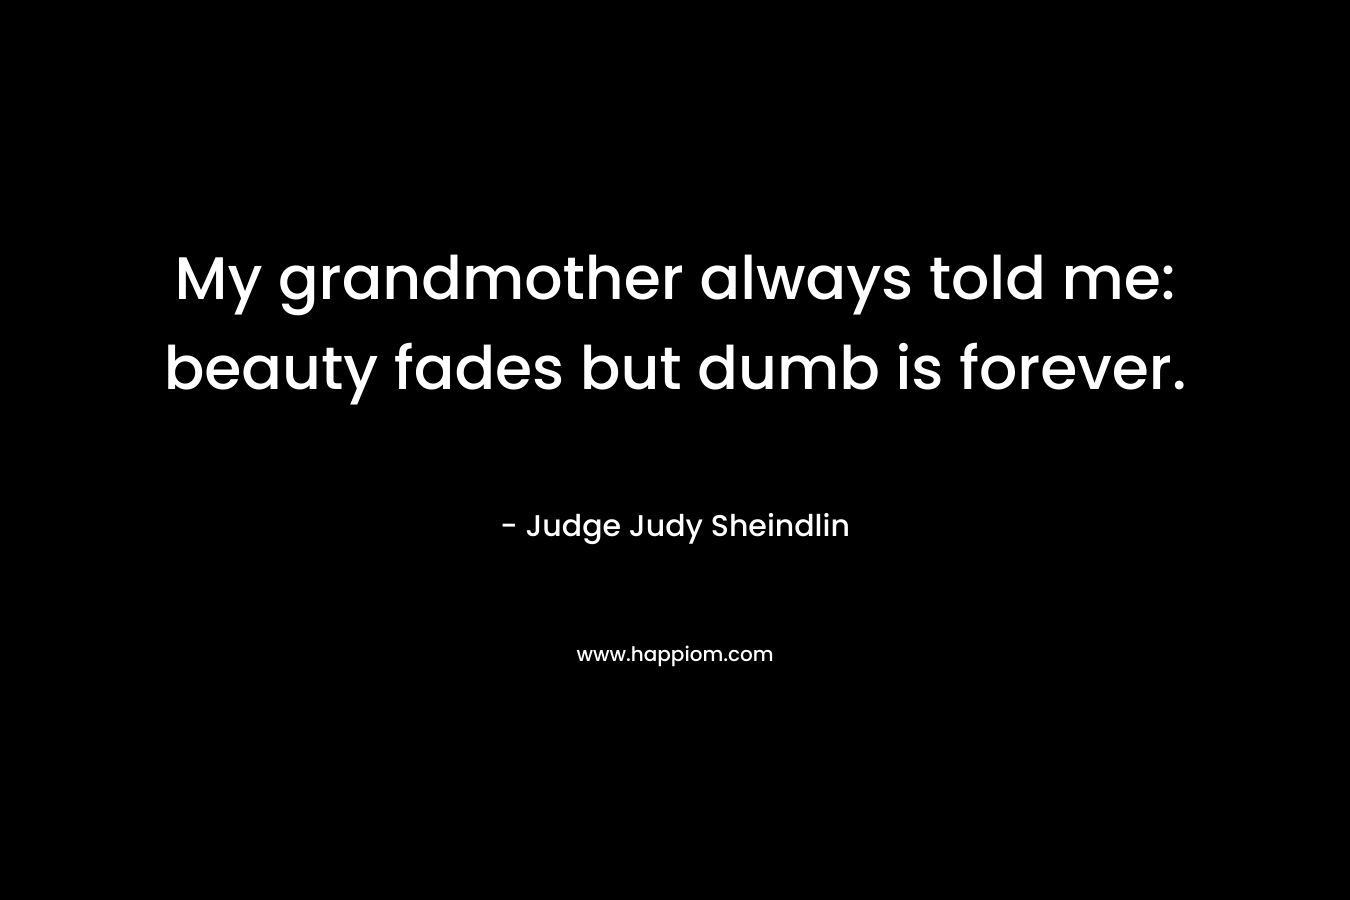 My grandmother always told me: beauty fades but dumb is forever.